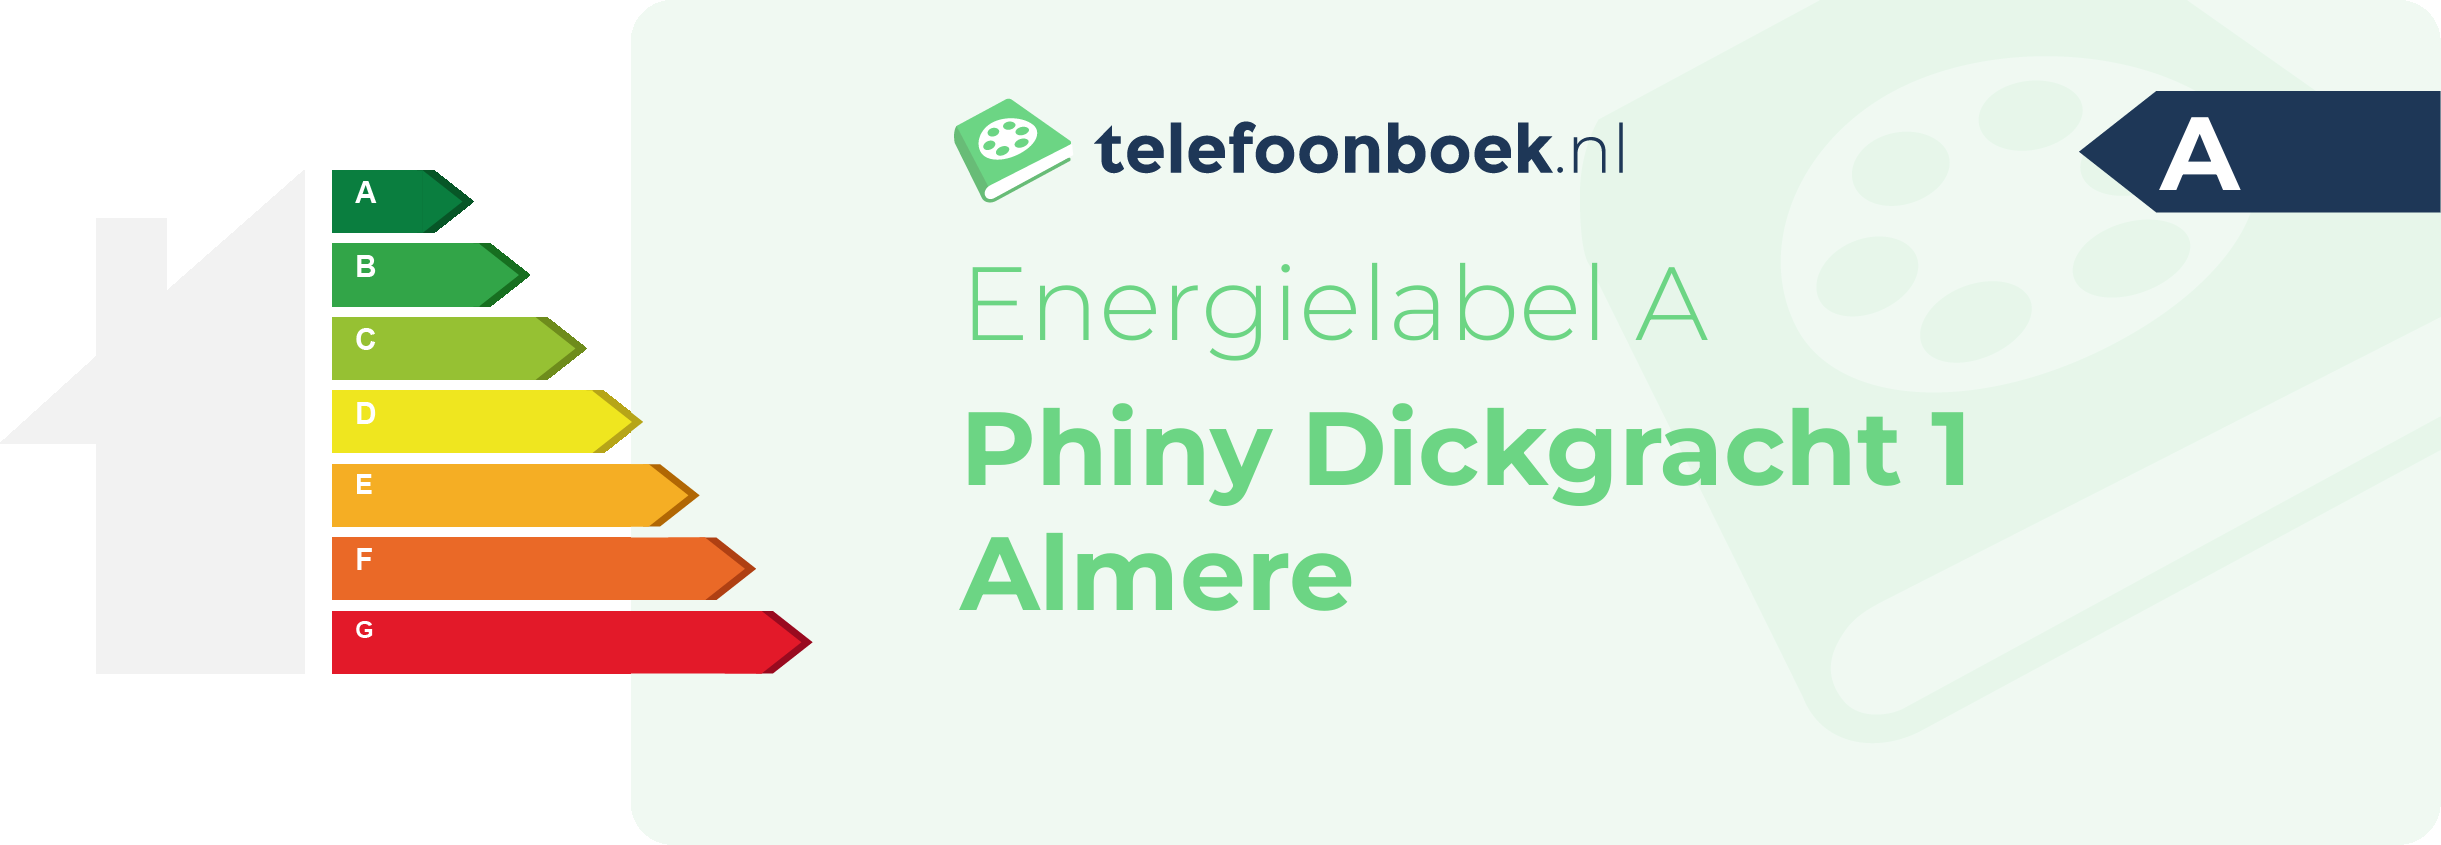 Energielabel Phiny Dickgracht 1 Almere